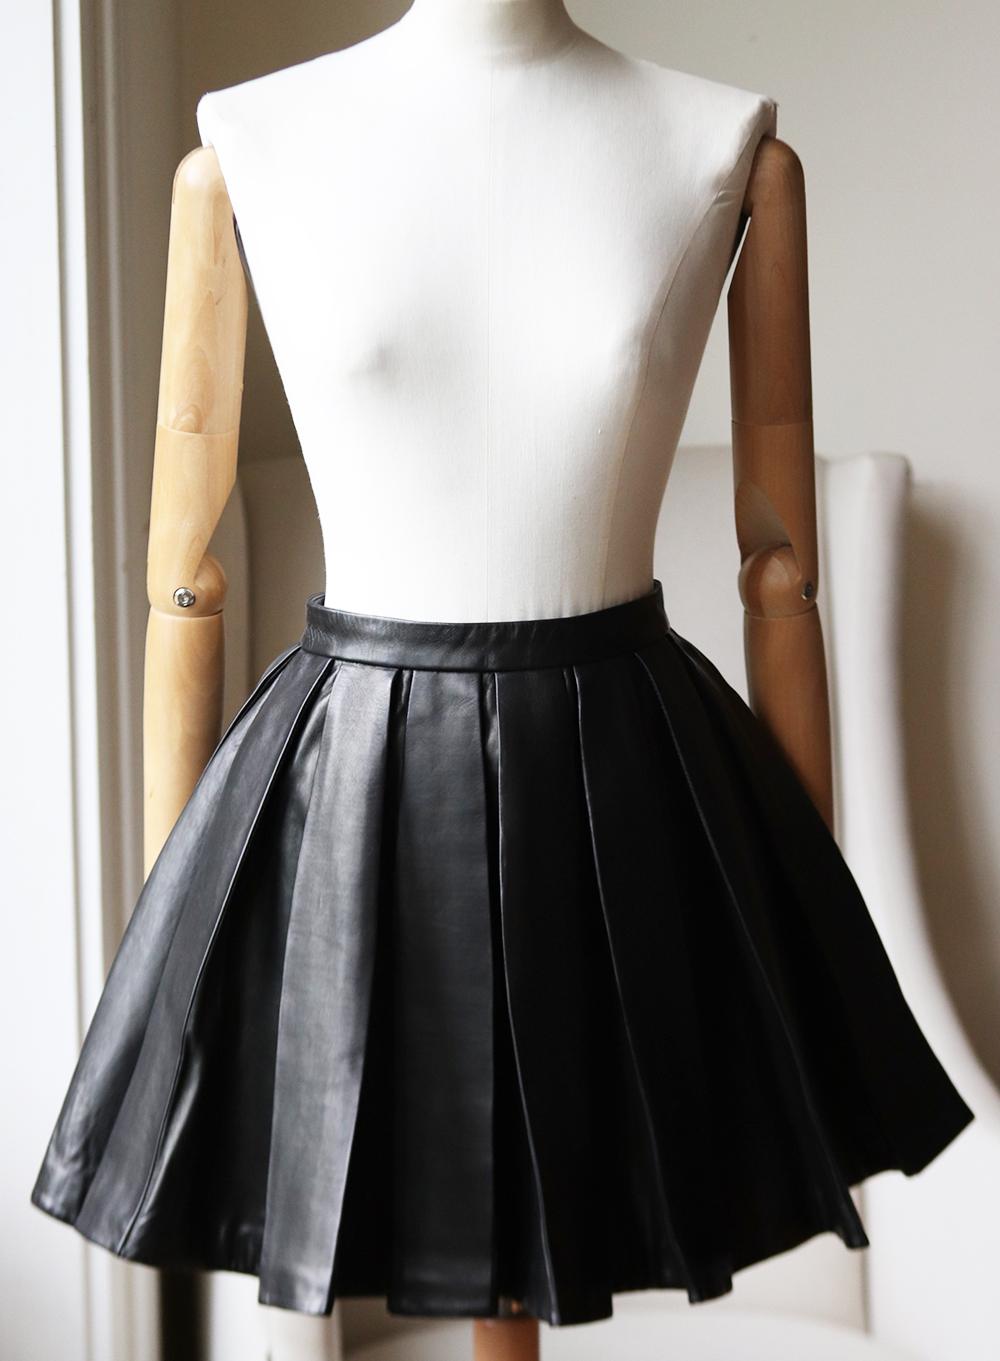 This Balmain skirt has been crafted from structured soft black leather with satin-lining and detailed with oversized pleats.
Black leather.
Hook and zip fastening at the back.
100% Leather (Lambs); lining: 52% viscose, 48% cotton.

Size: FR 36 (UK